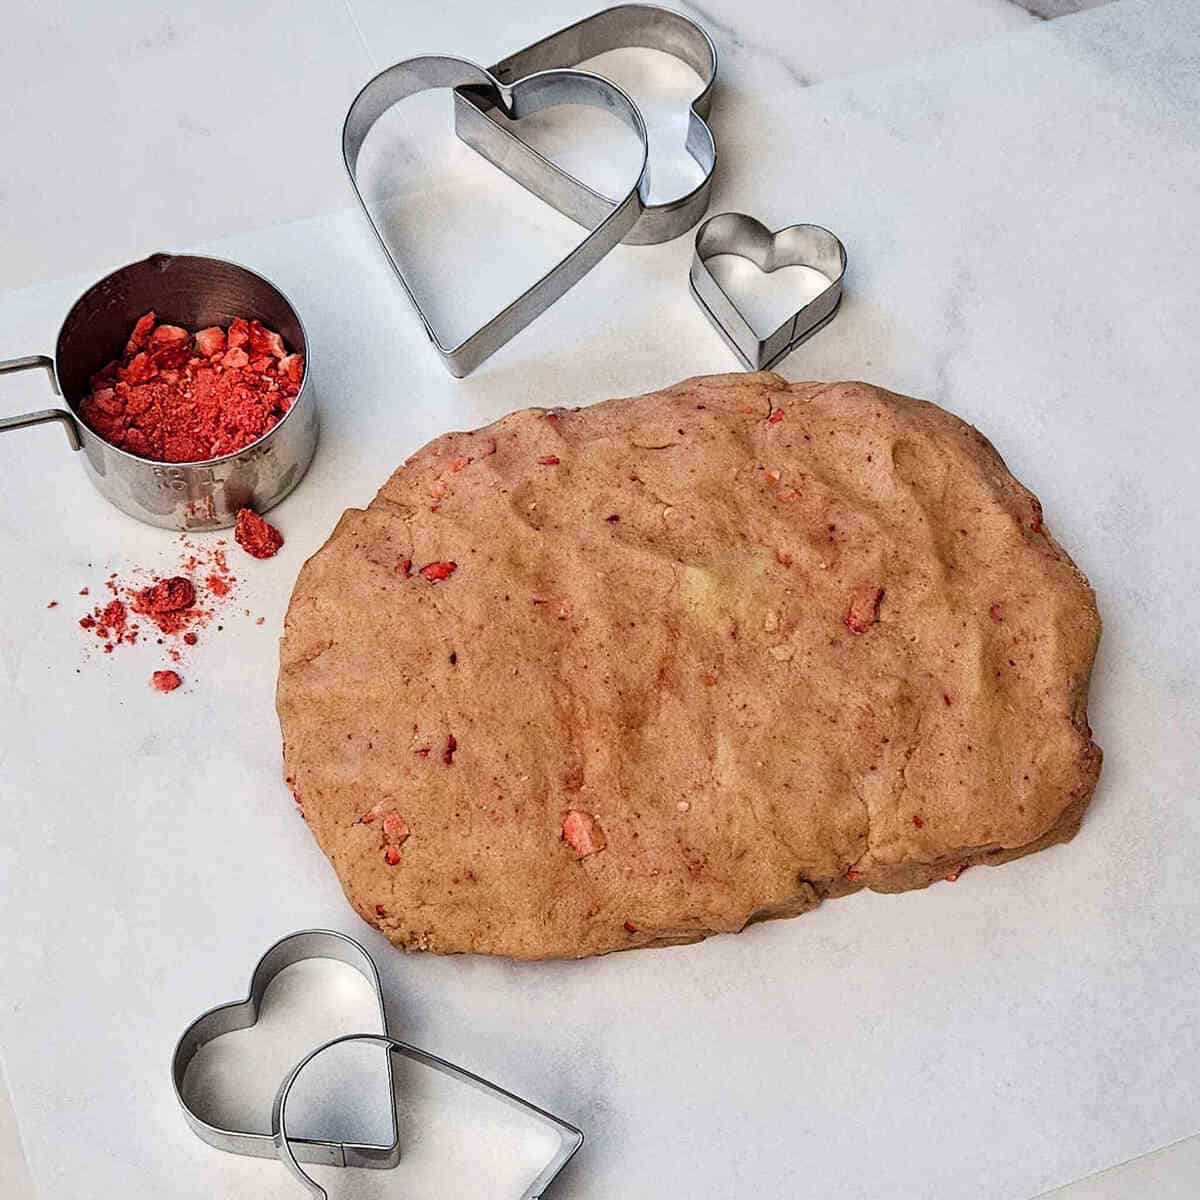 the strawberry shortbread dough finished on parchment paper ready to wrap and refrigerate, next to heart shaped cookie cutters and crushed freeze dried strawberries